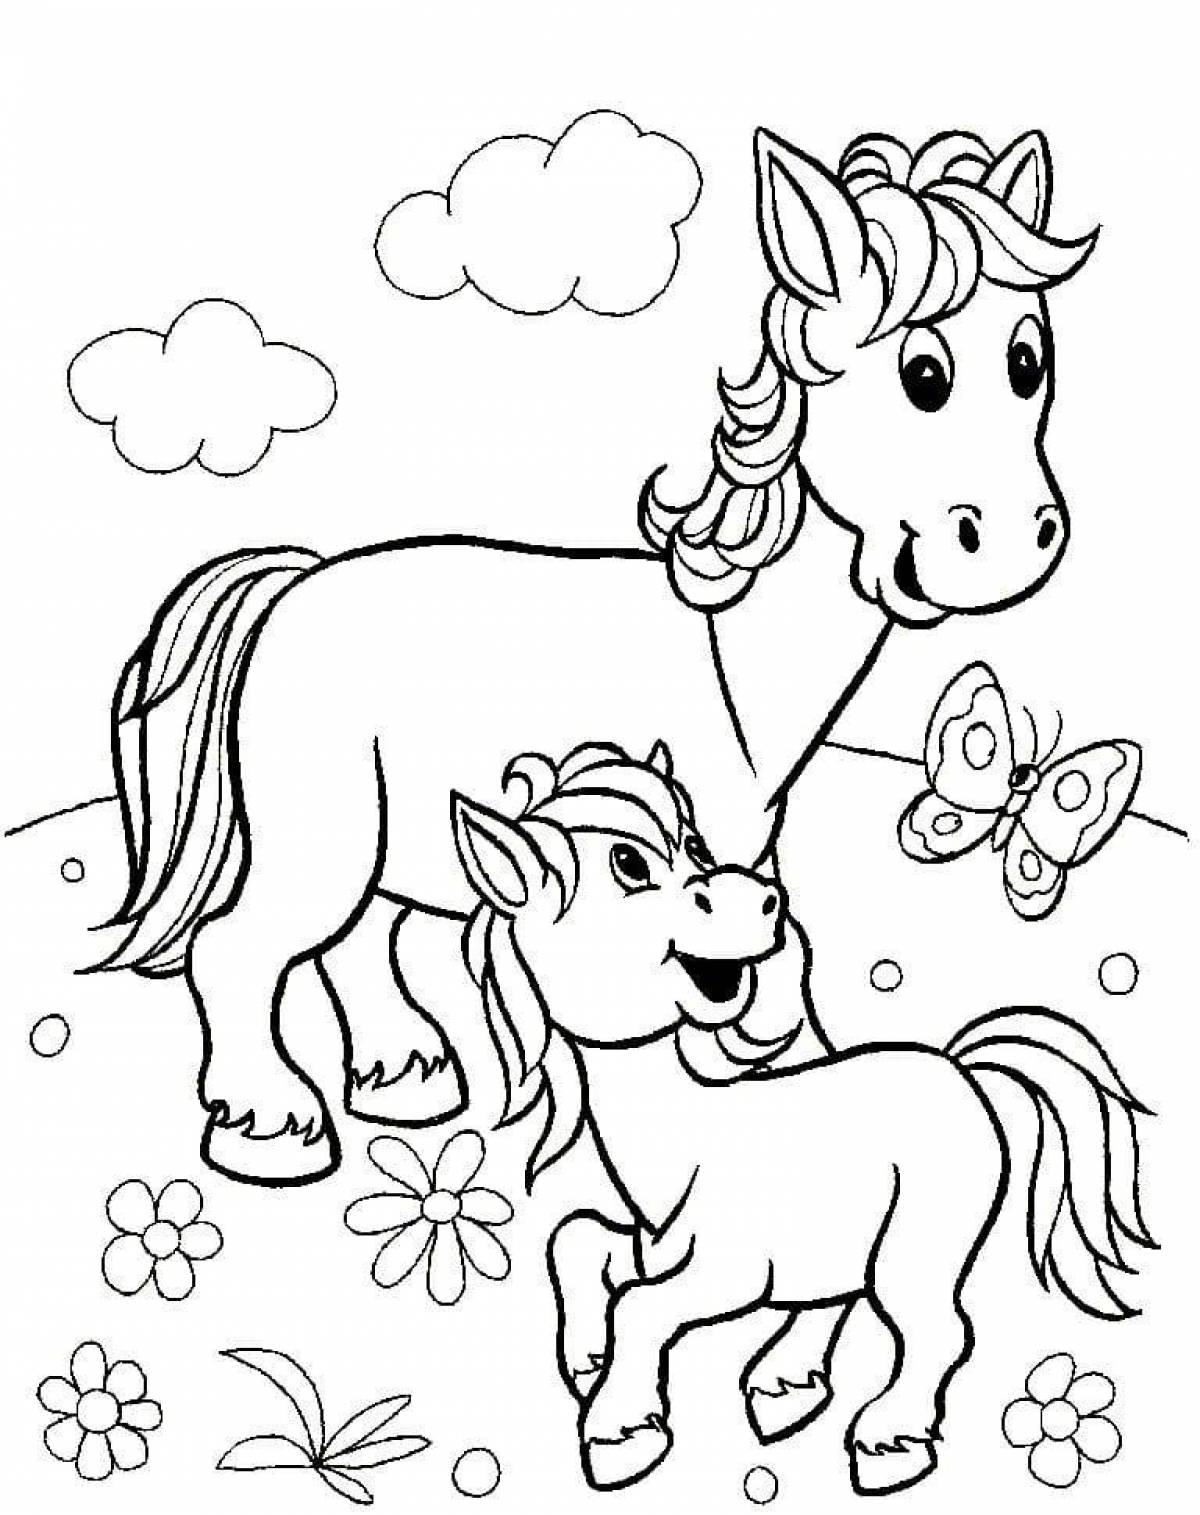 Impressive pet coloring pages for 4-5 year olds